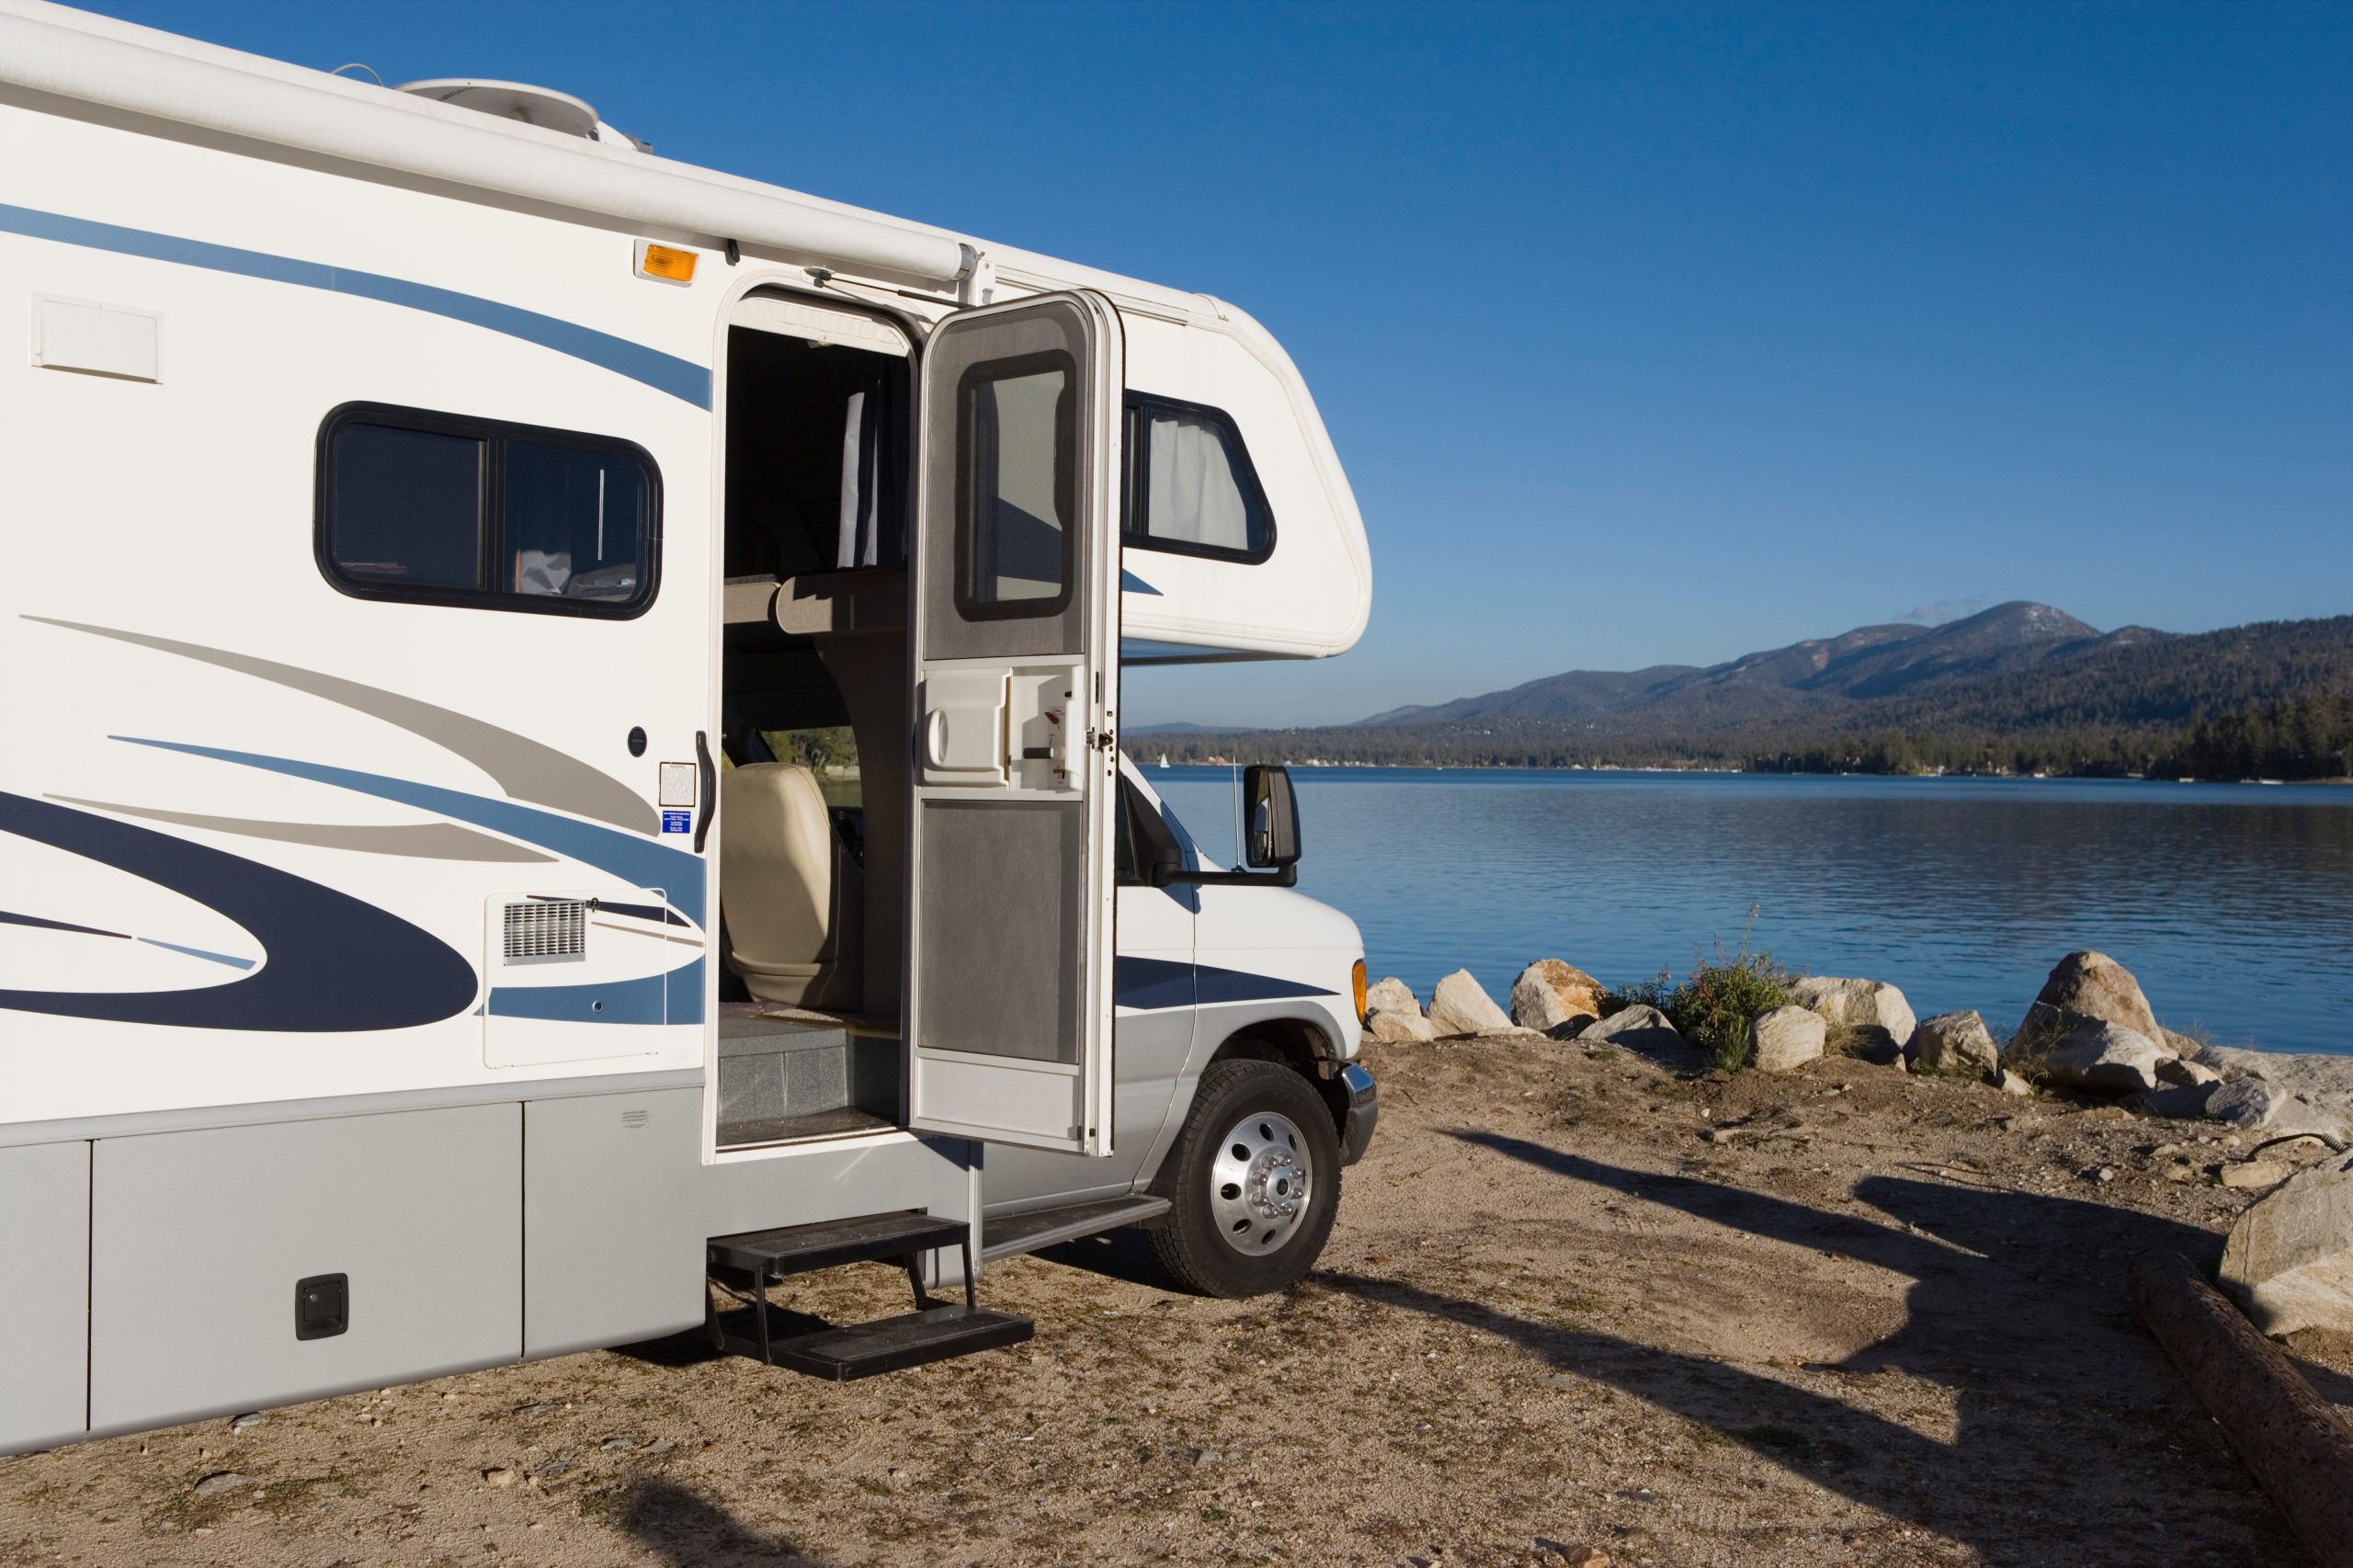 10 Reasons Why RV Living is the Best Way to Explore the Outdoors